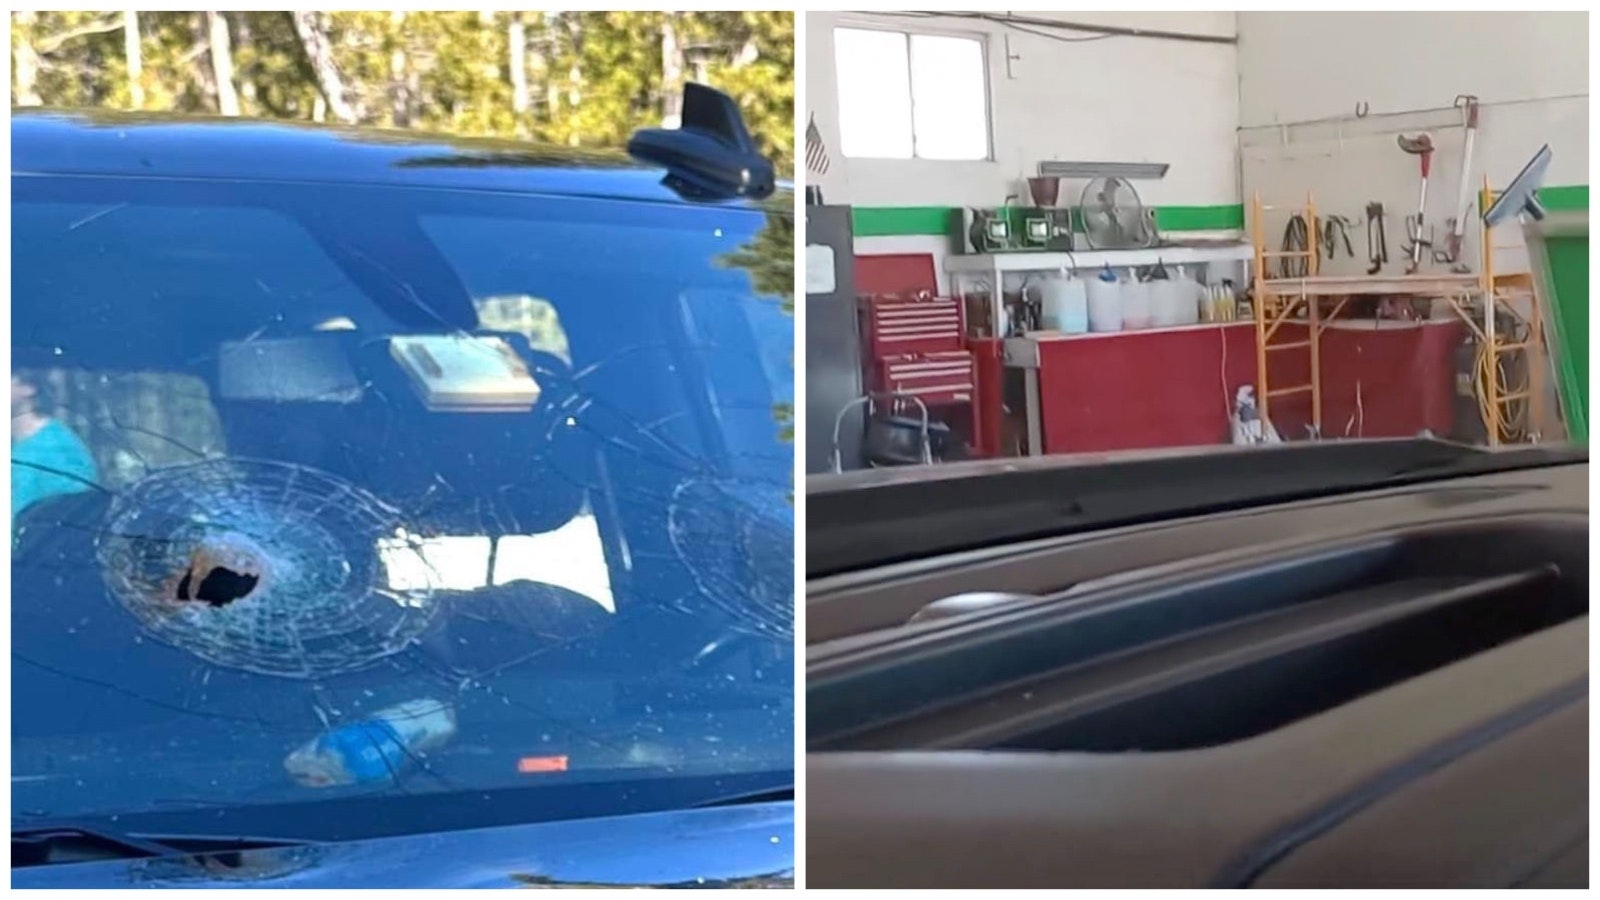 Left: After a can of bear spray exploded in the cab of this truck. Right: That can of bear spray was sitting in this nook in the front window dash of the truck when it exploded. The windshield has since been replaced, but the detailer cleaning it out says it'll never be the same inside the truck.